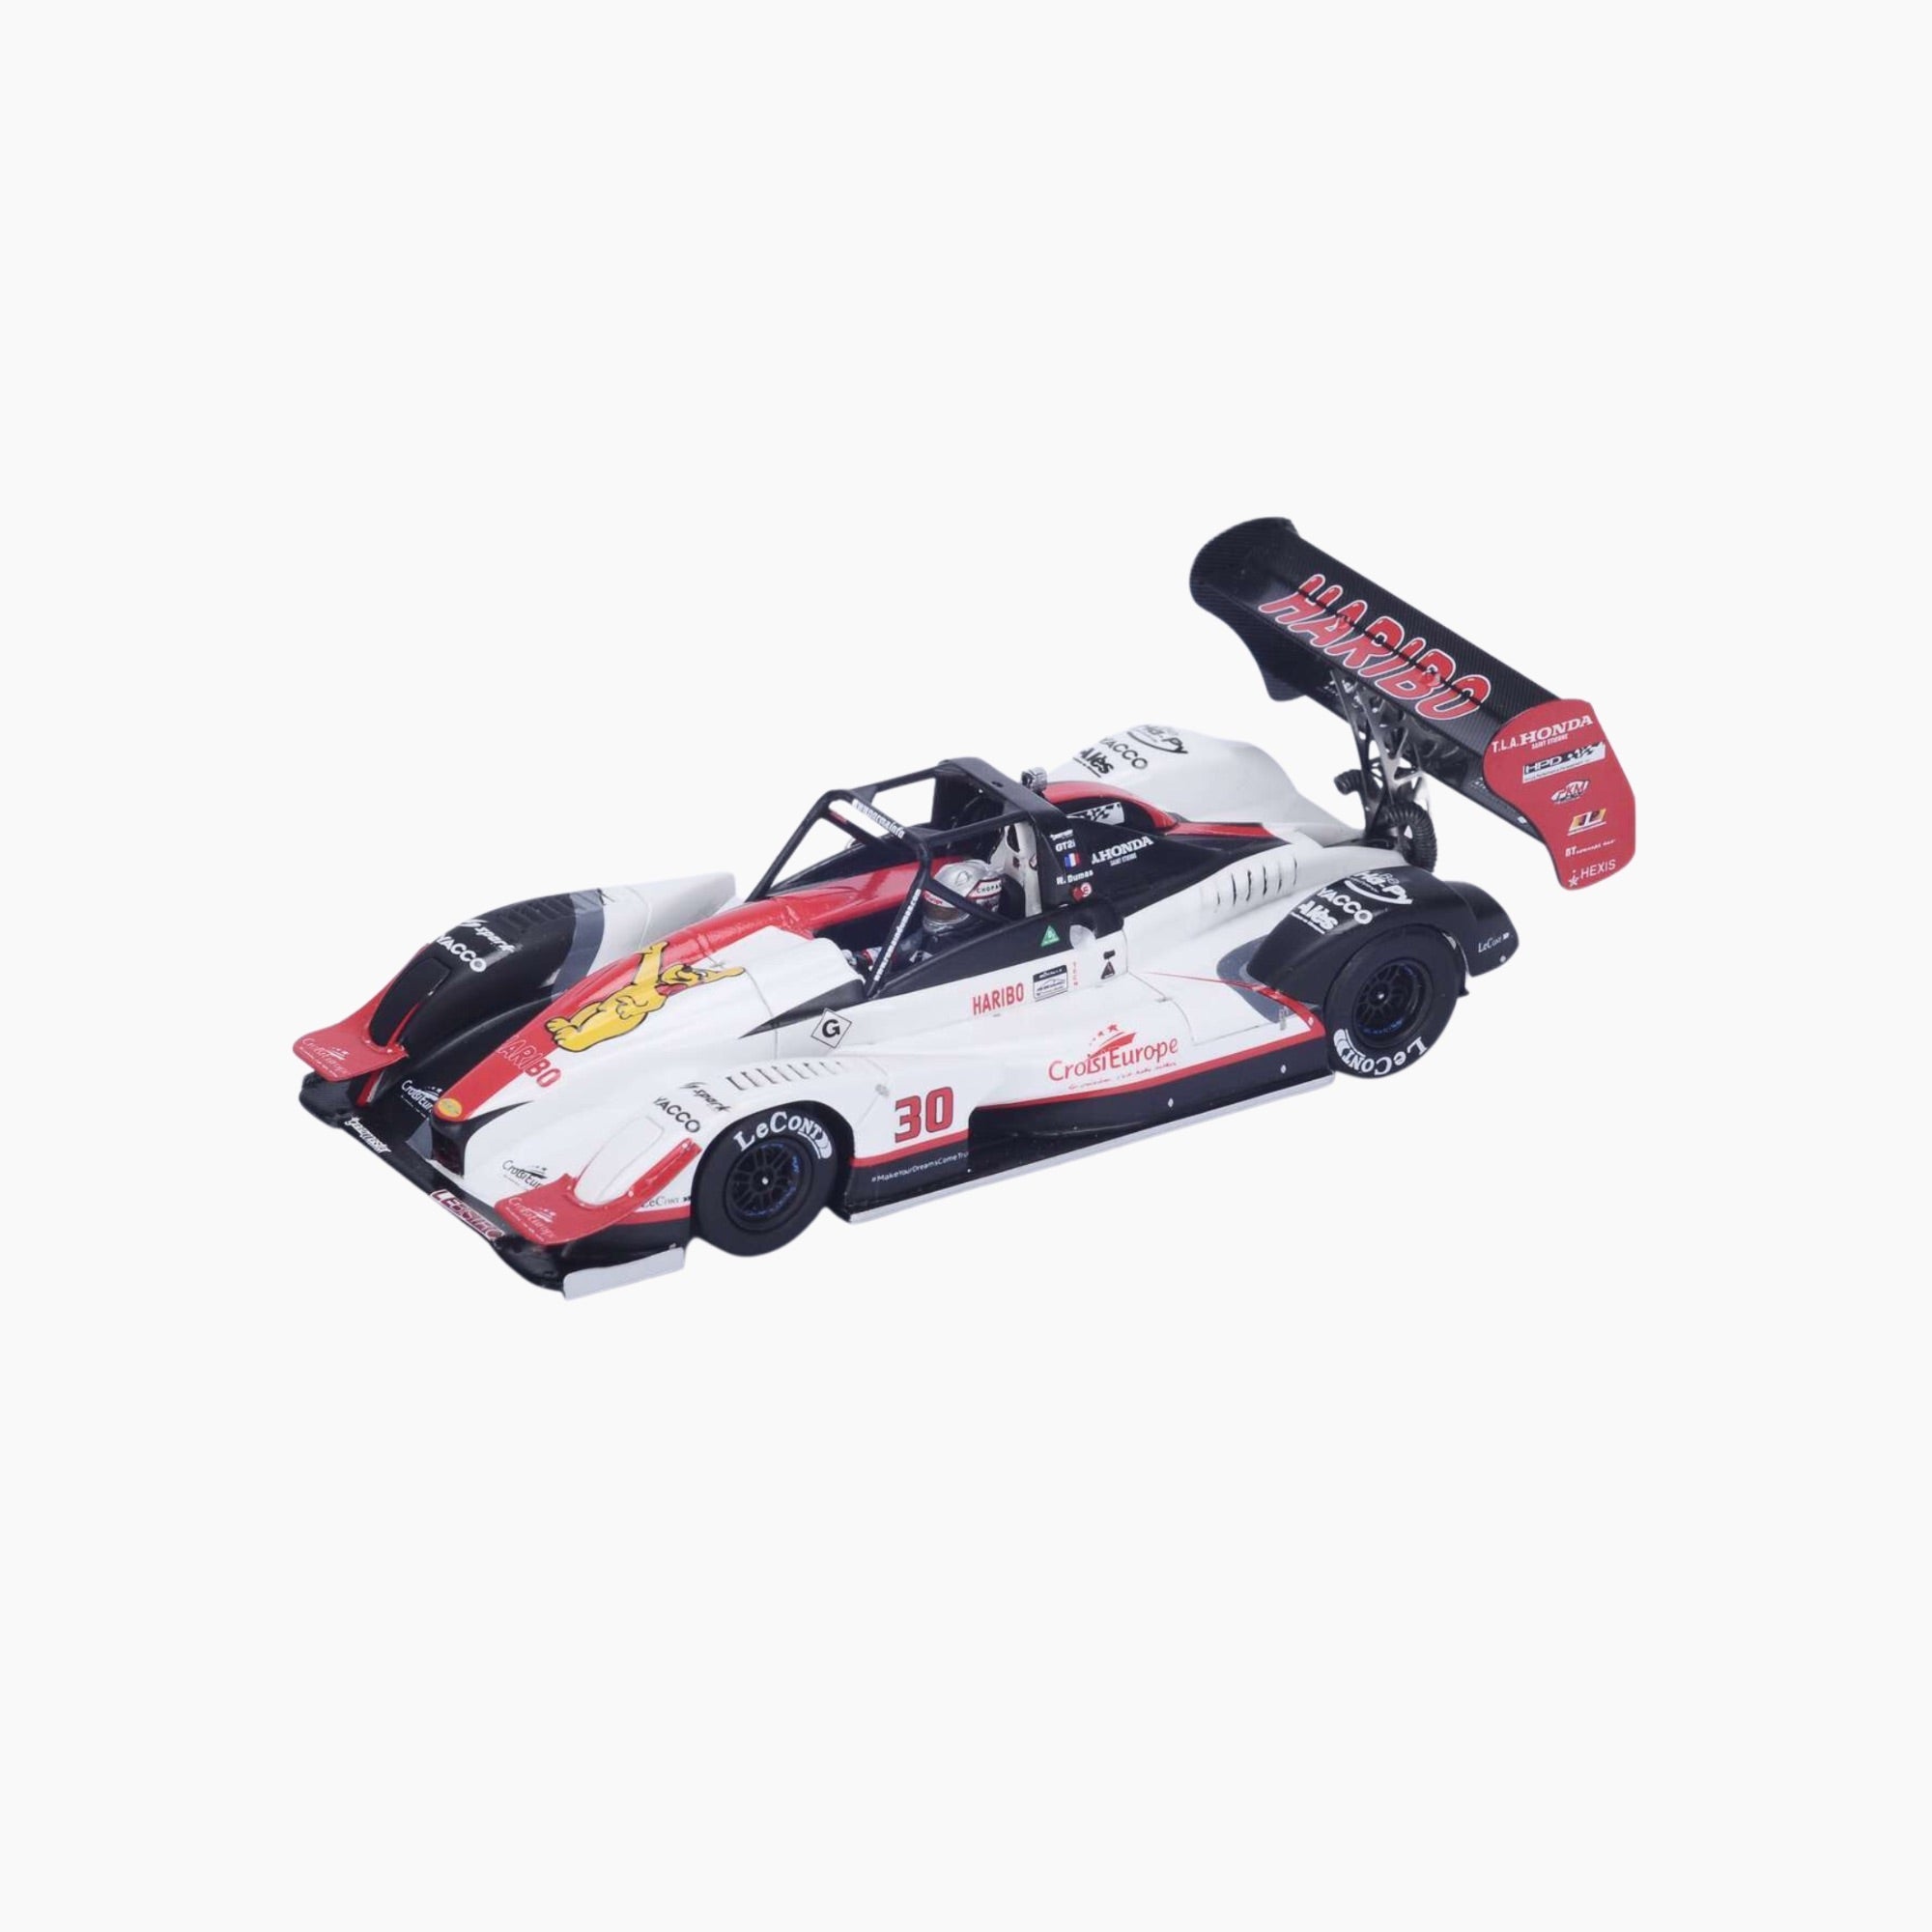 Norma M20 RD Limited Honda Winner Pikes Peak 2014 | 1:43 Scale Model-1:43 Scale Model-Spark Models-gpx-store